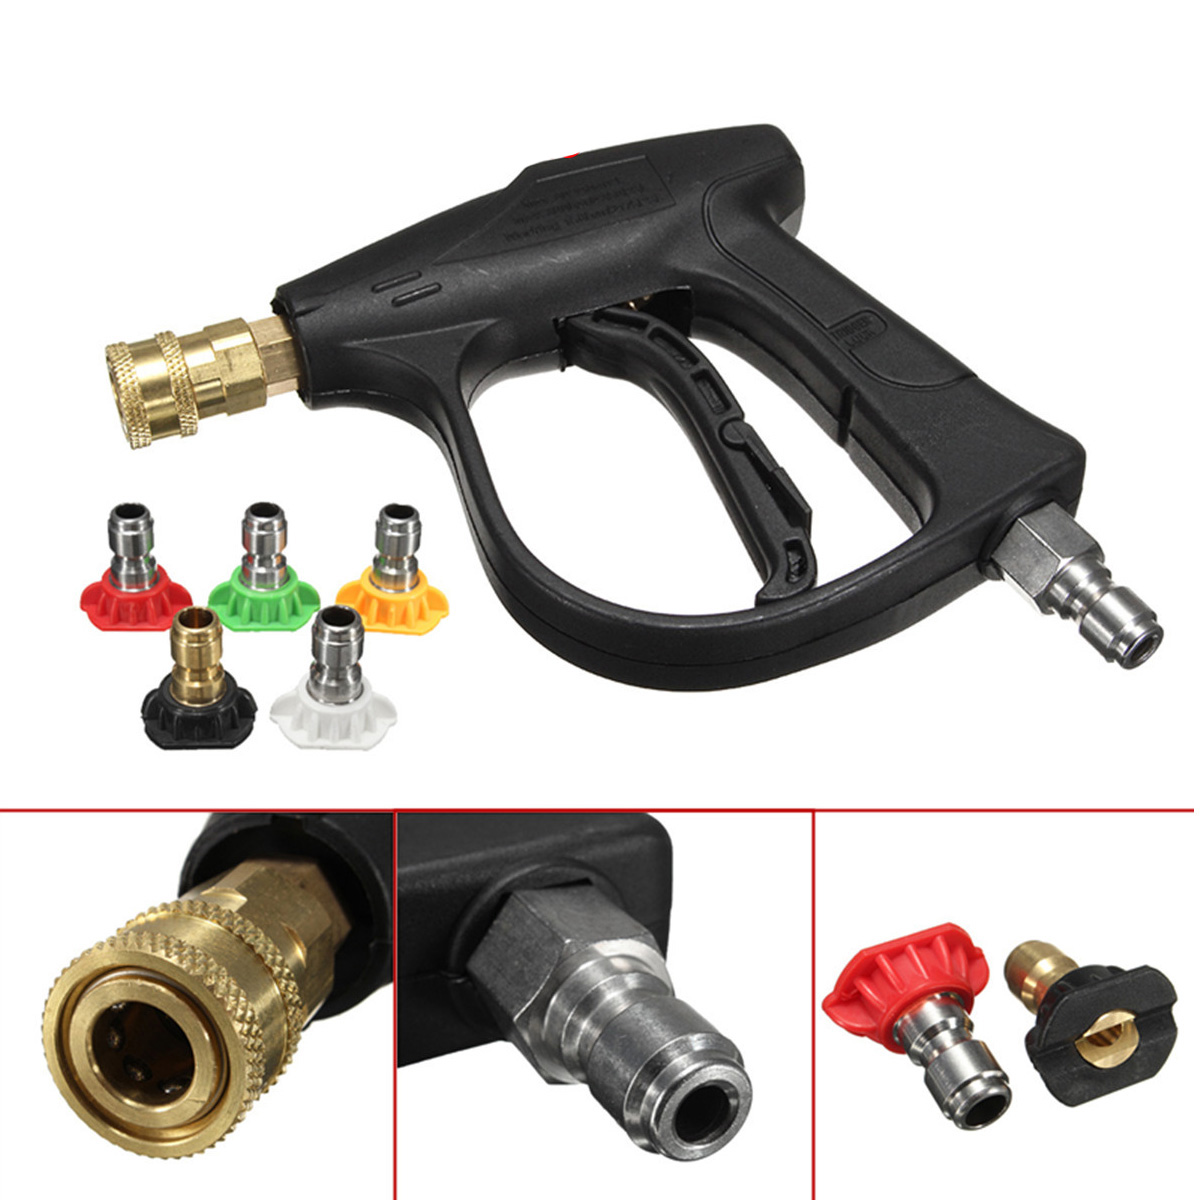 3000PSI-High-Pressure-Water-Gun-Adapter-With-5pcs-Nozzles-for-High-Pressure-Water-Cleaner-1130889-3